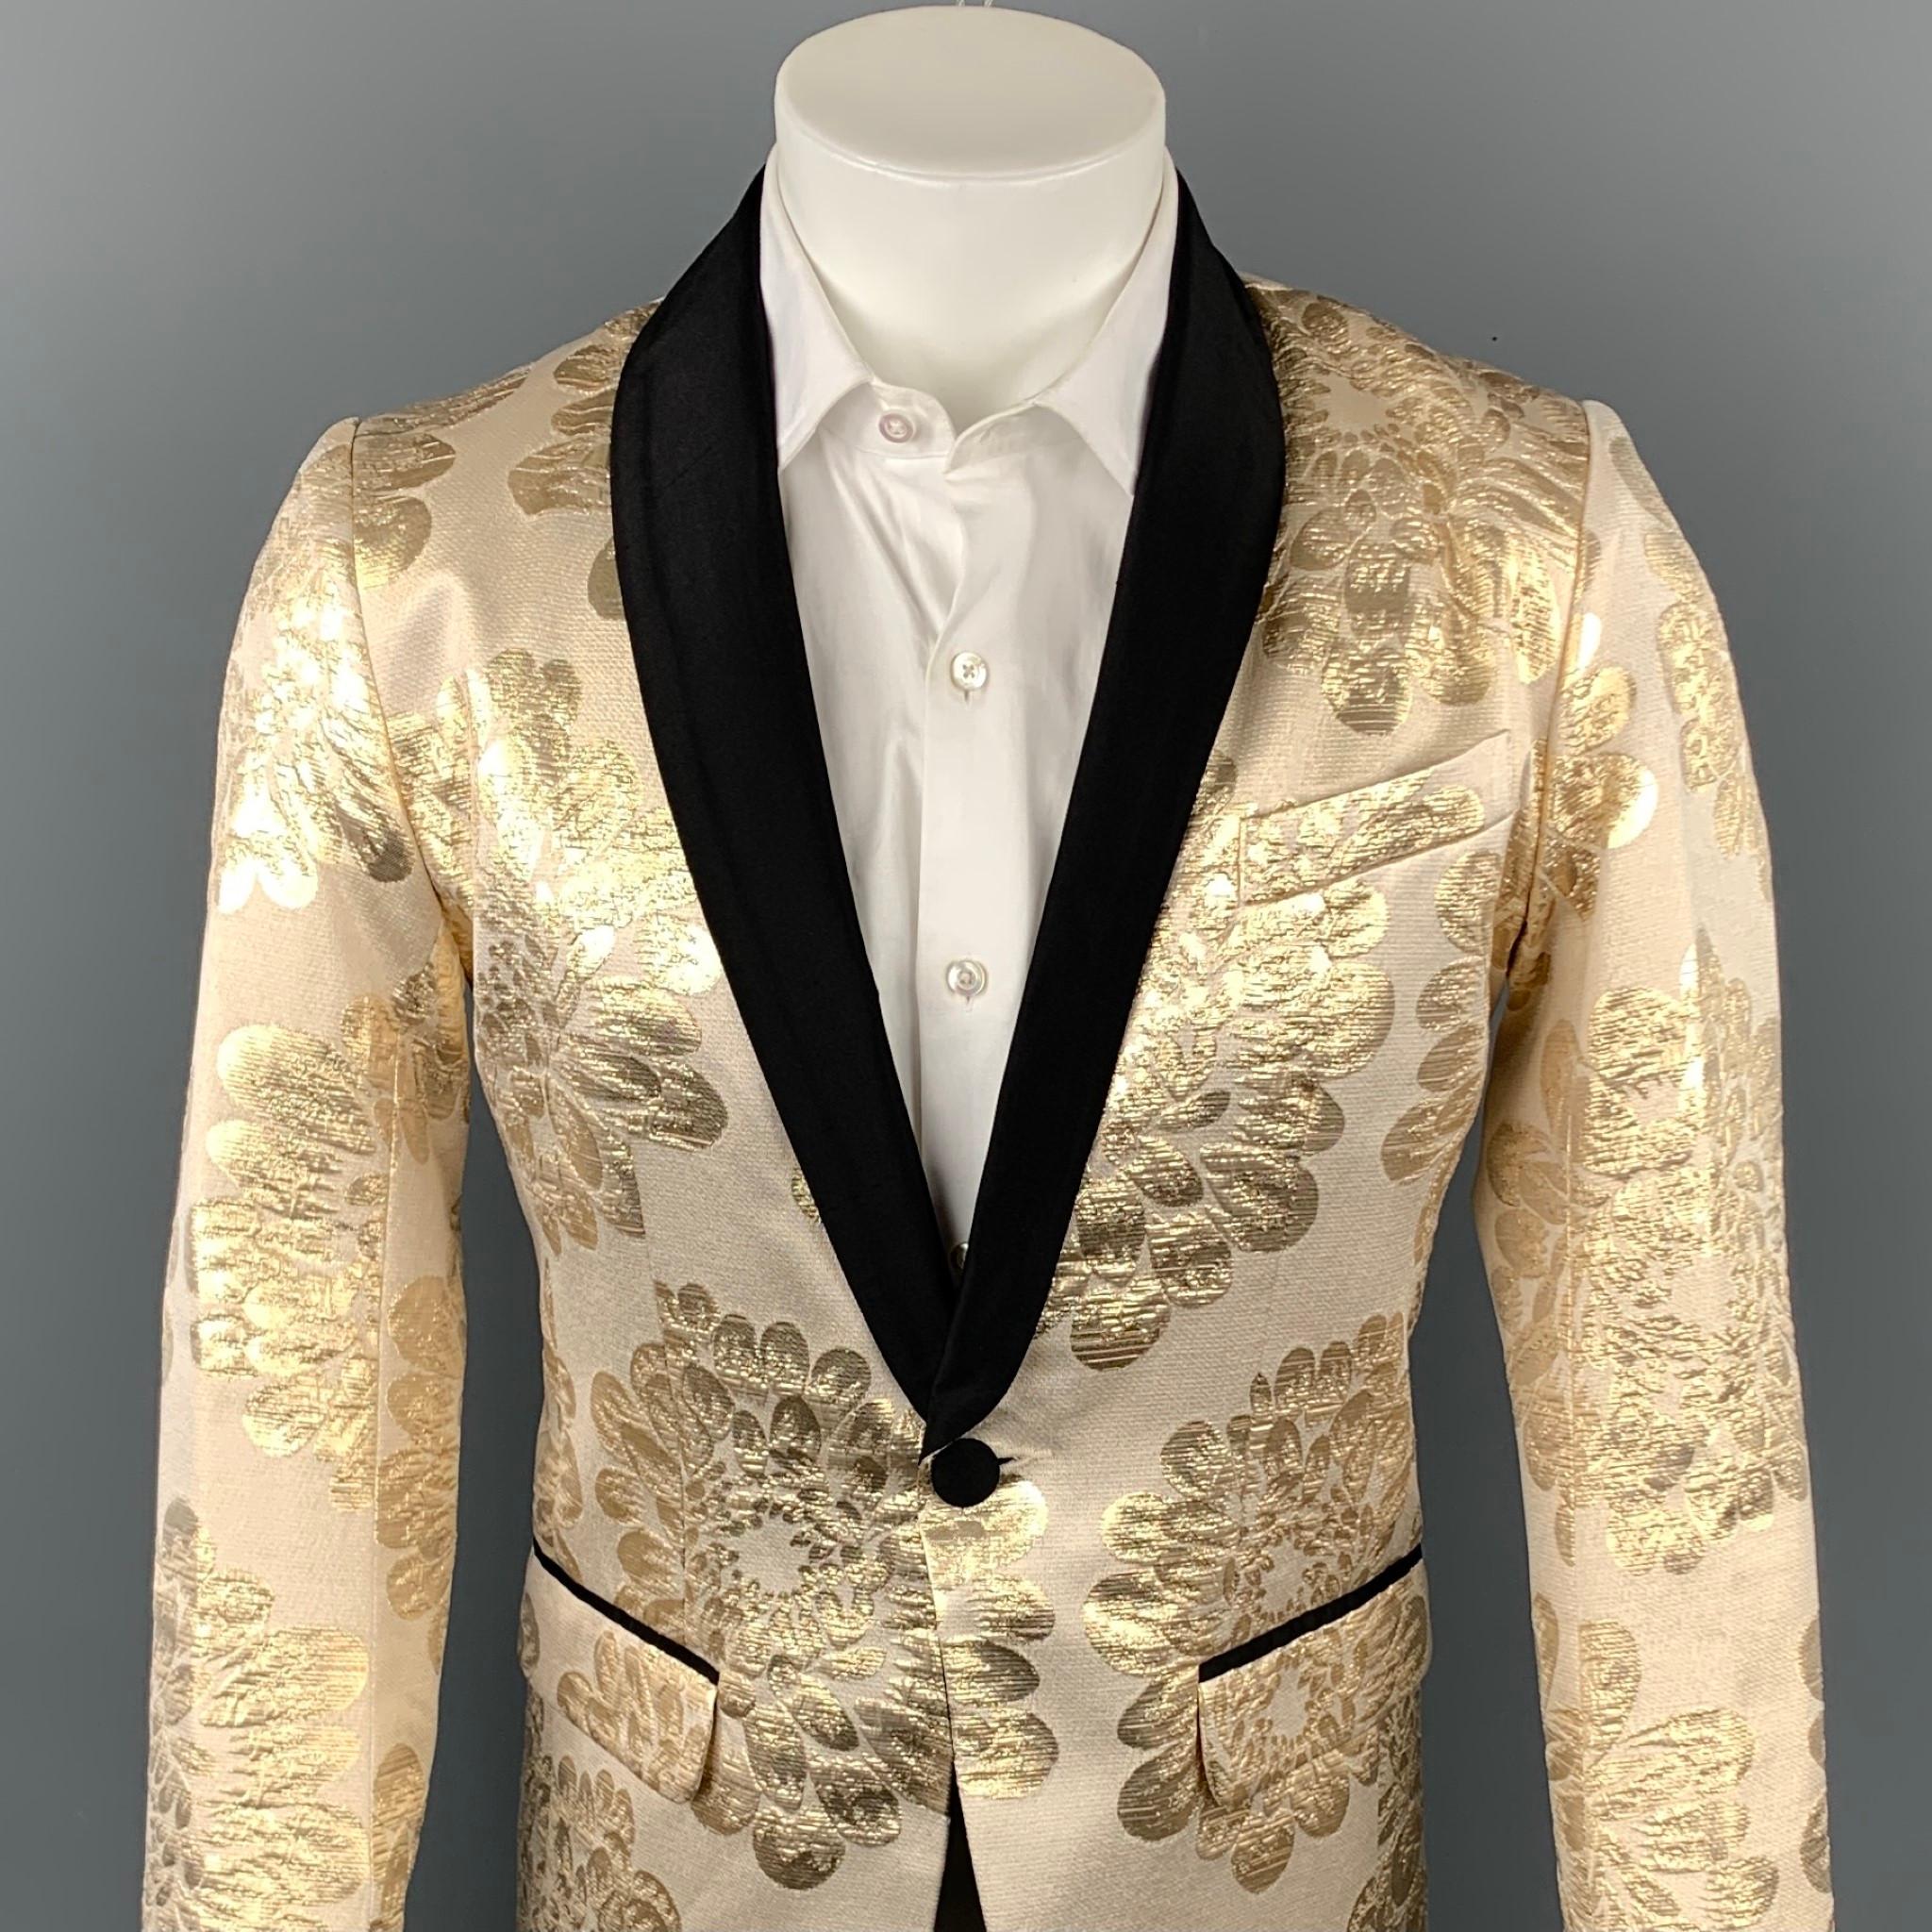 MR TURK sport coat comes in a beige & gold brocade cotton with a full liner featuring a shawl lapel, flap pockets, and a single button closure. Made in USA.

Very Good Pre-Owned Condition.
Marked: 36

Measurements:

Shoulder: 16.5 in.
Chest: 36